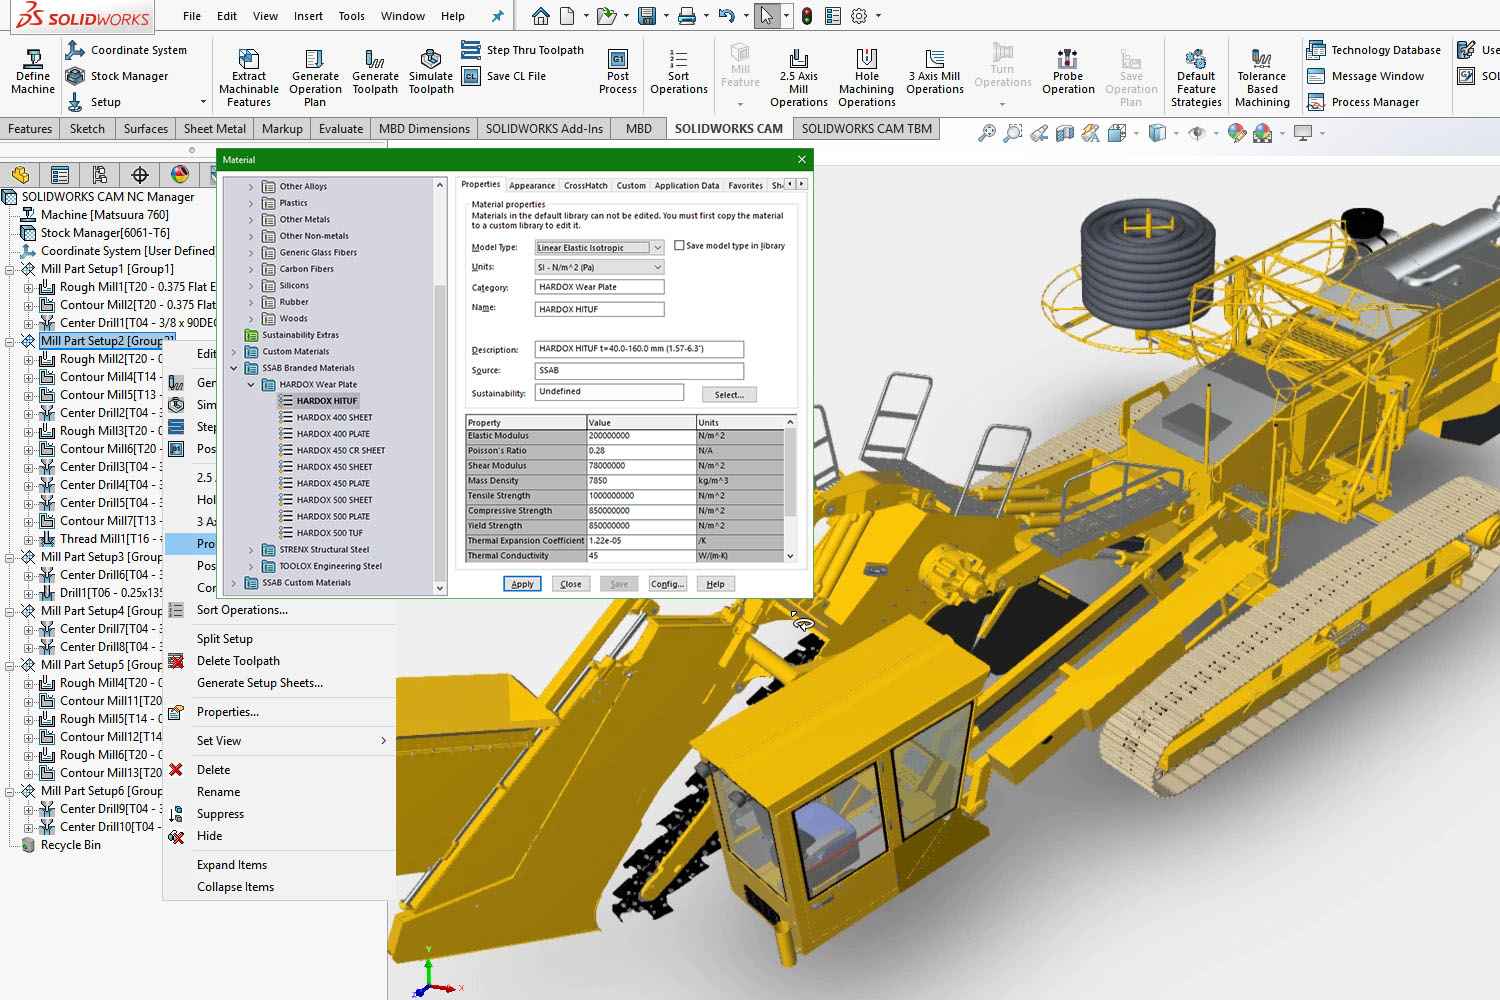 solidworks latest version free download with crack